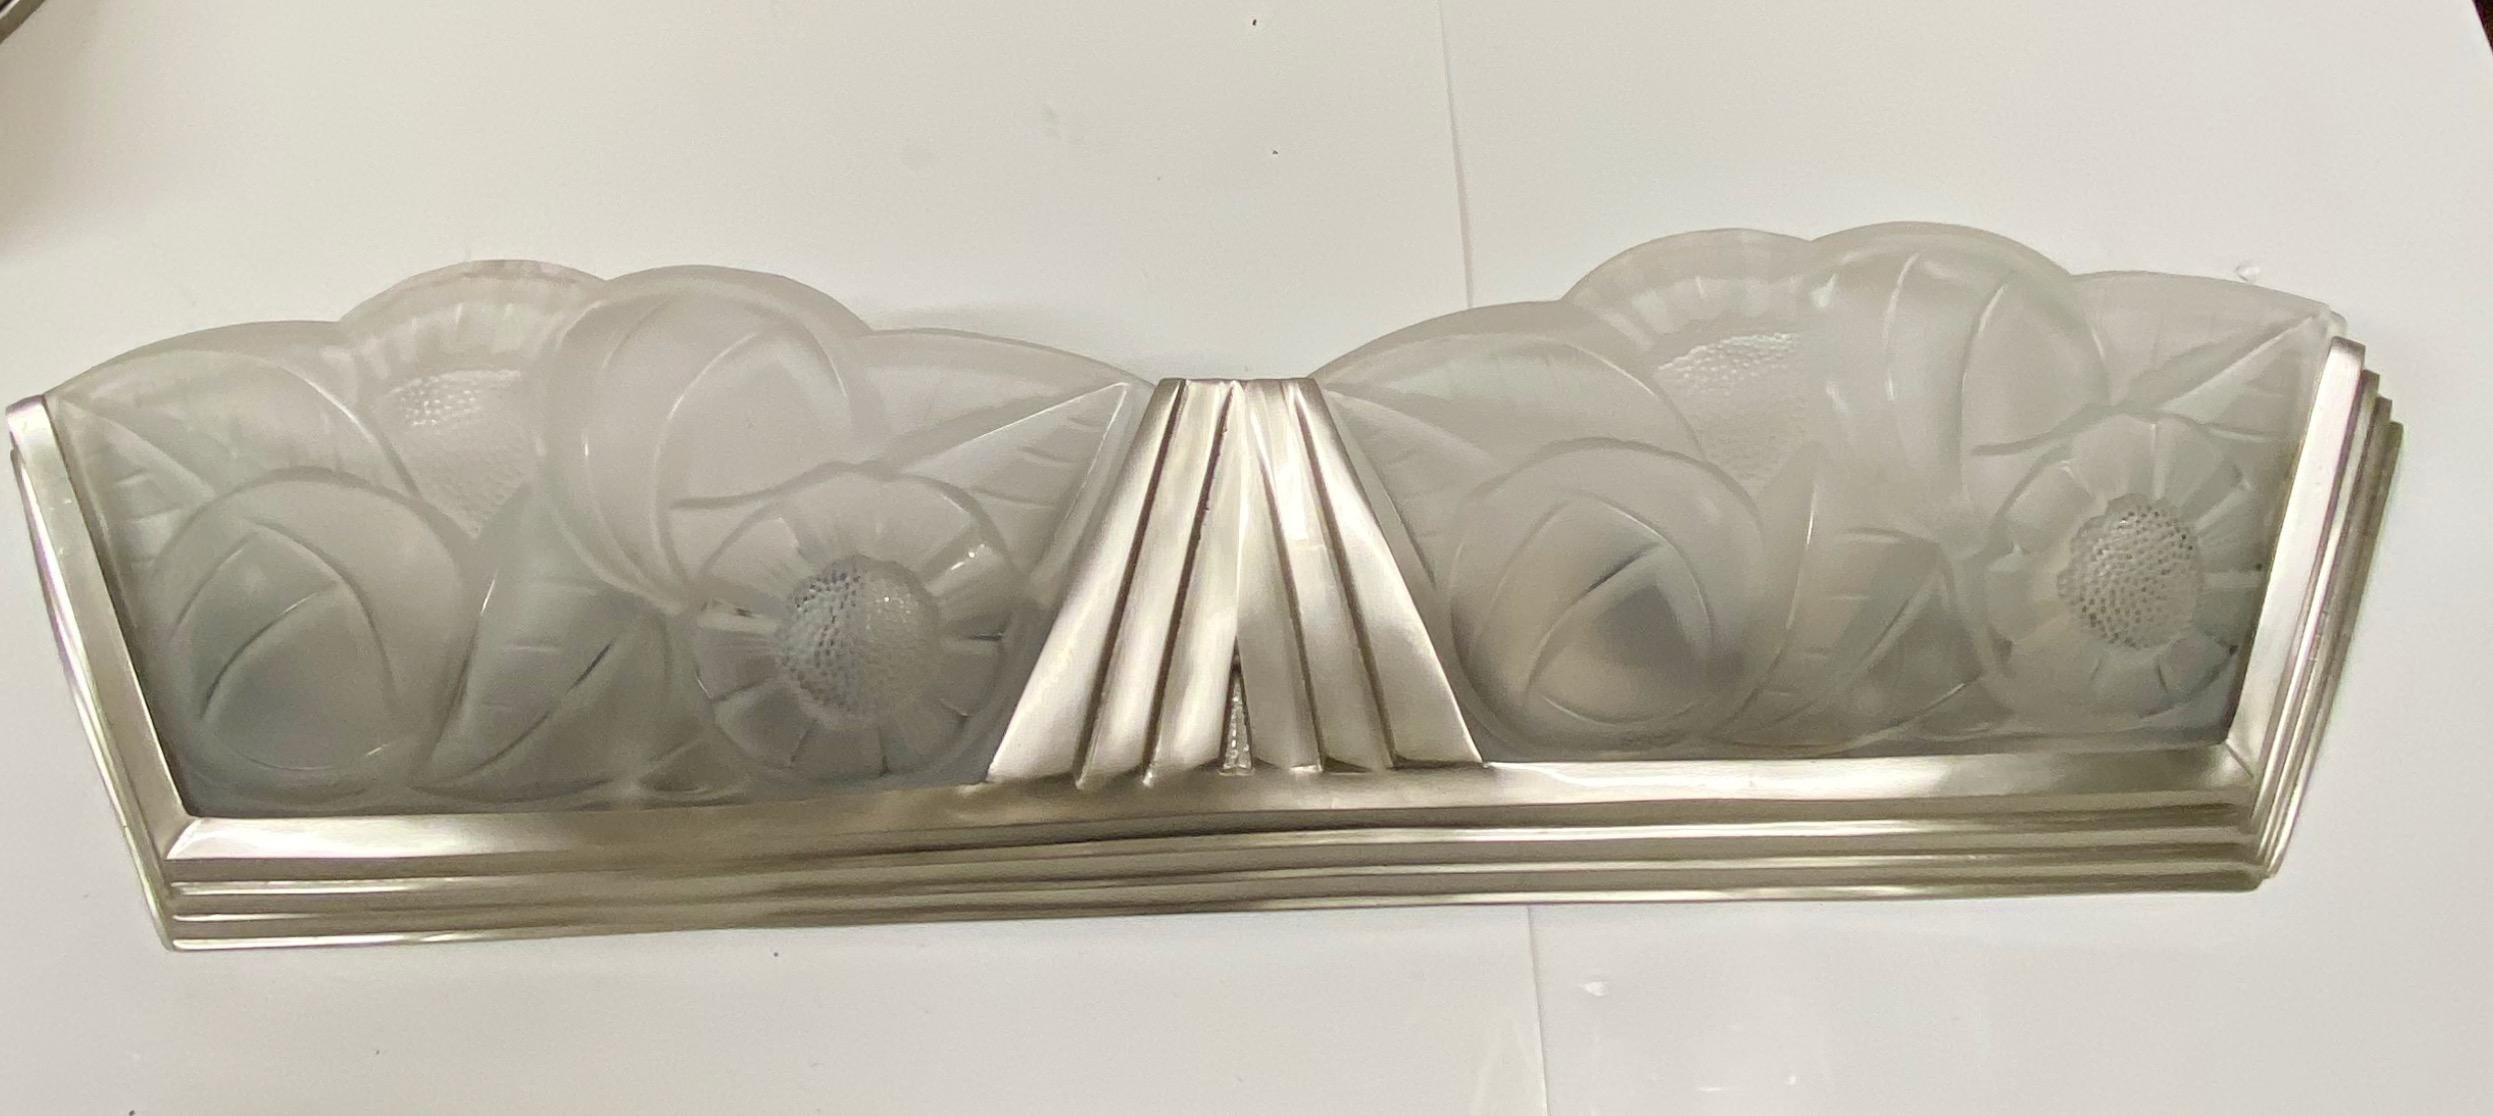 French Art Deco Sconce Signed by Degue In Good Condition For Sale In North Bergen, NJ